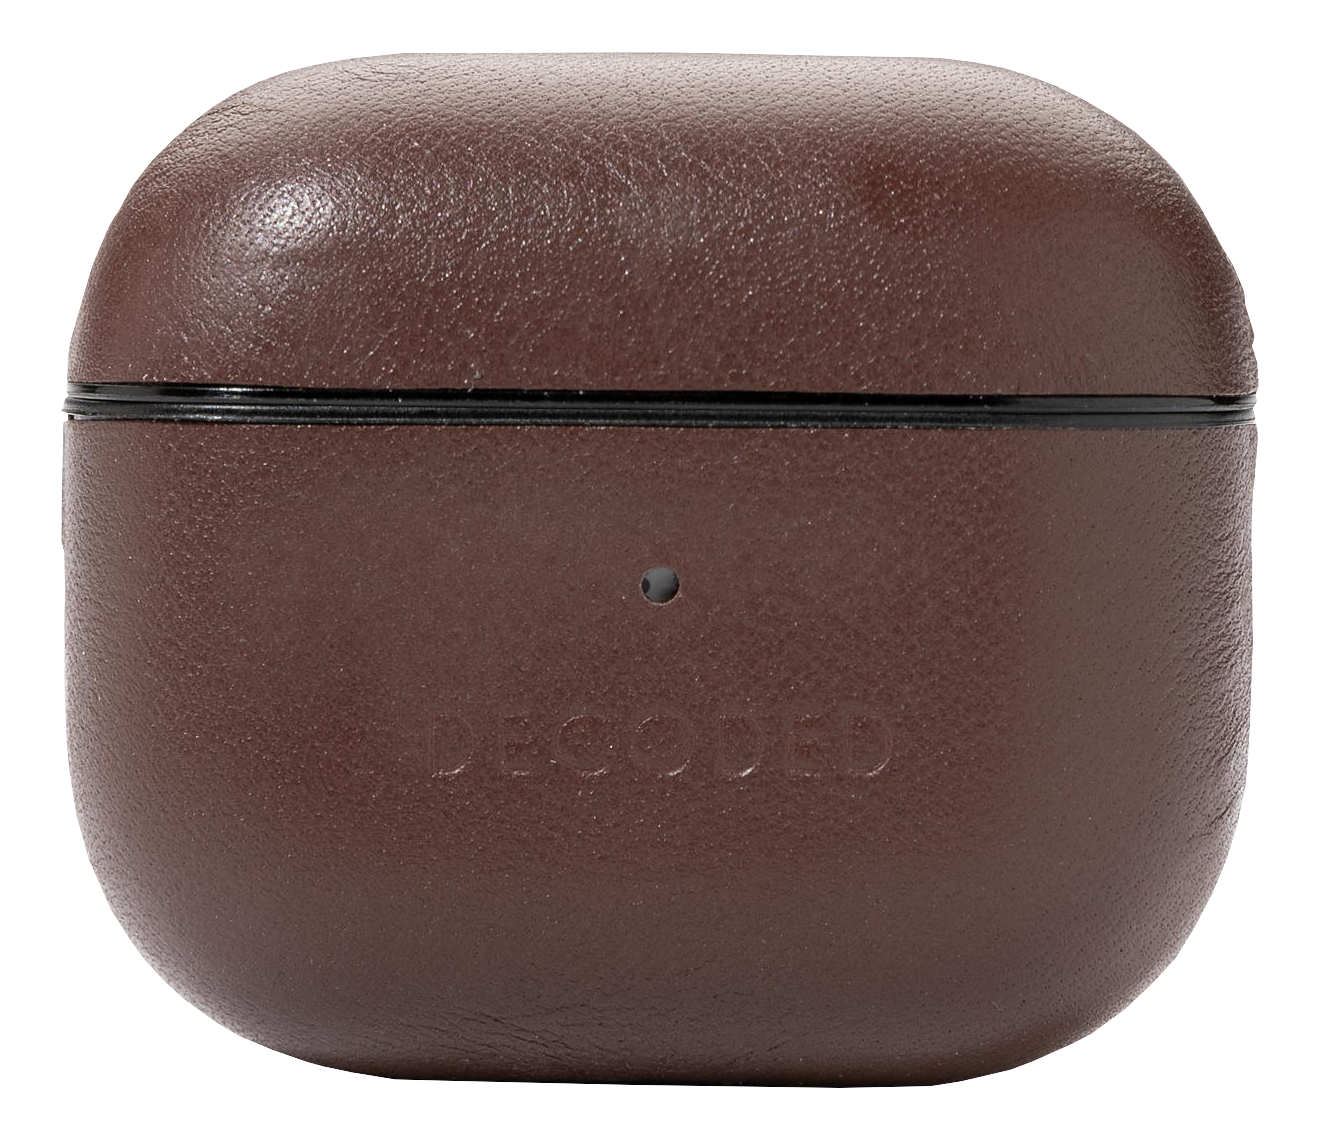 DECODED Leather AirCase - Housse de protection (brun)